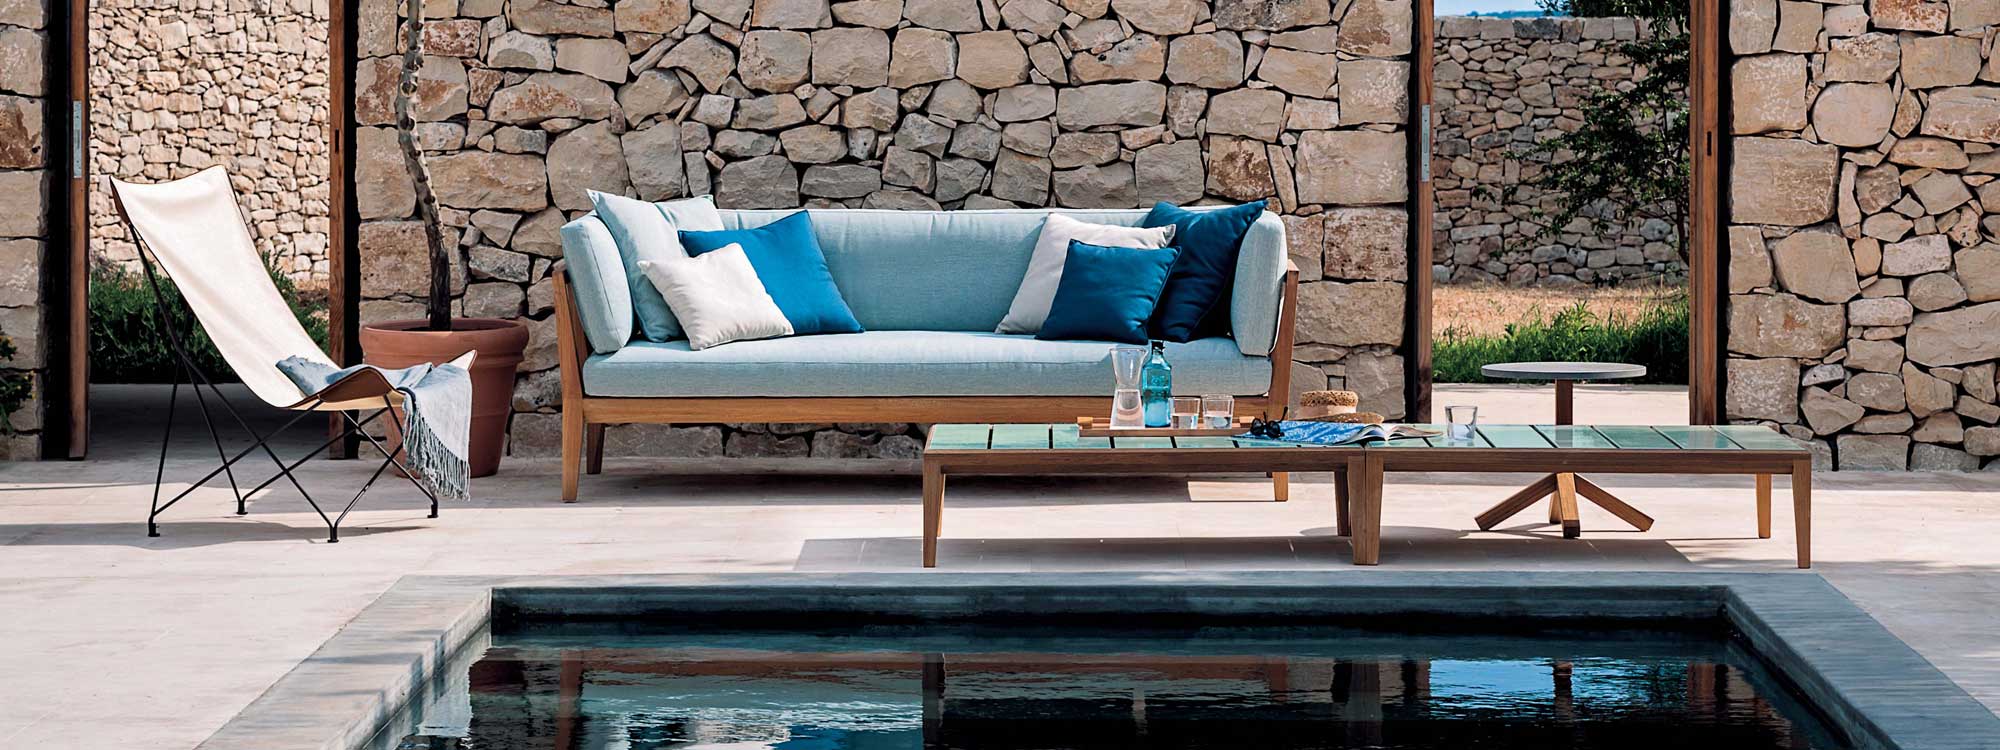 Teka luxury garden sofa with Lawrence butterfly chair and Root side table on poolside